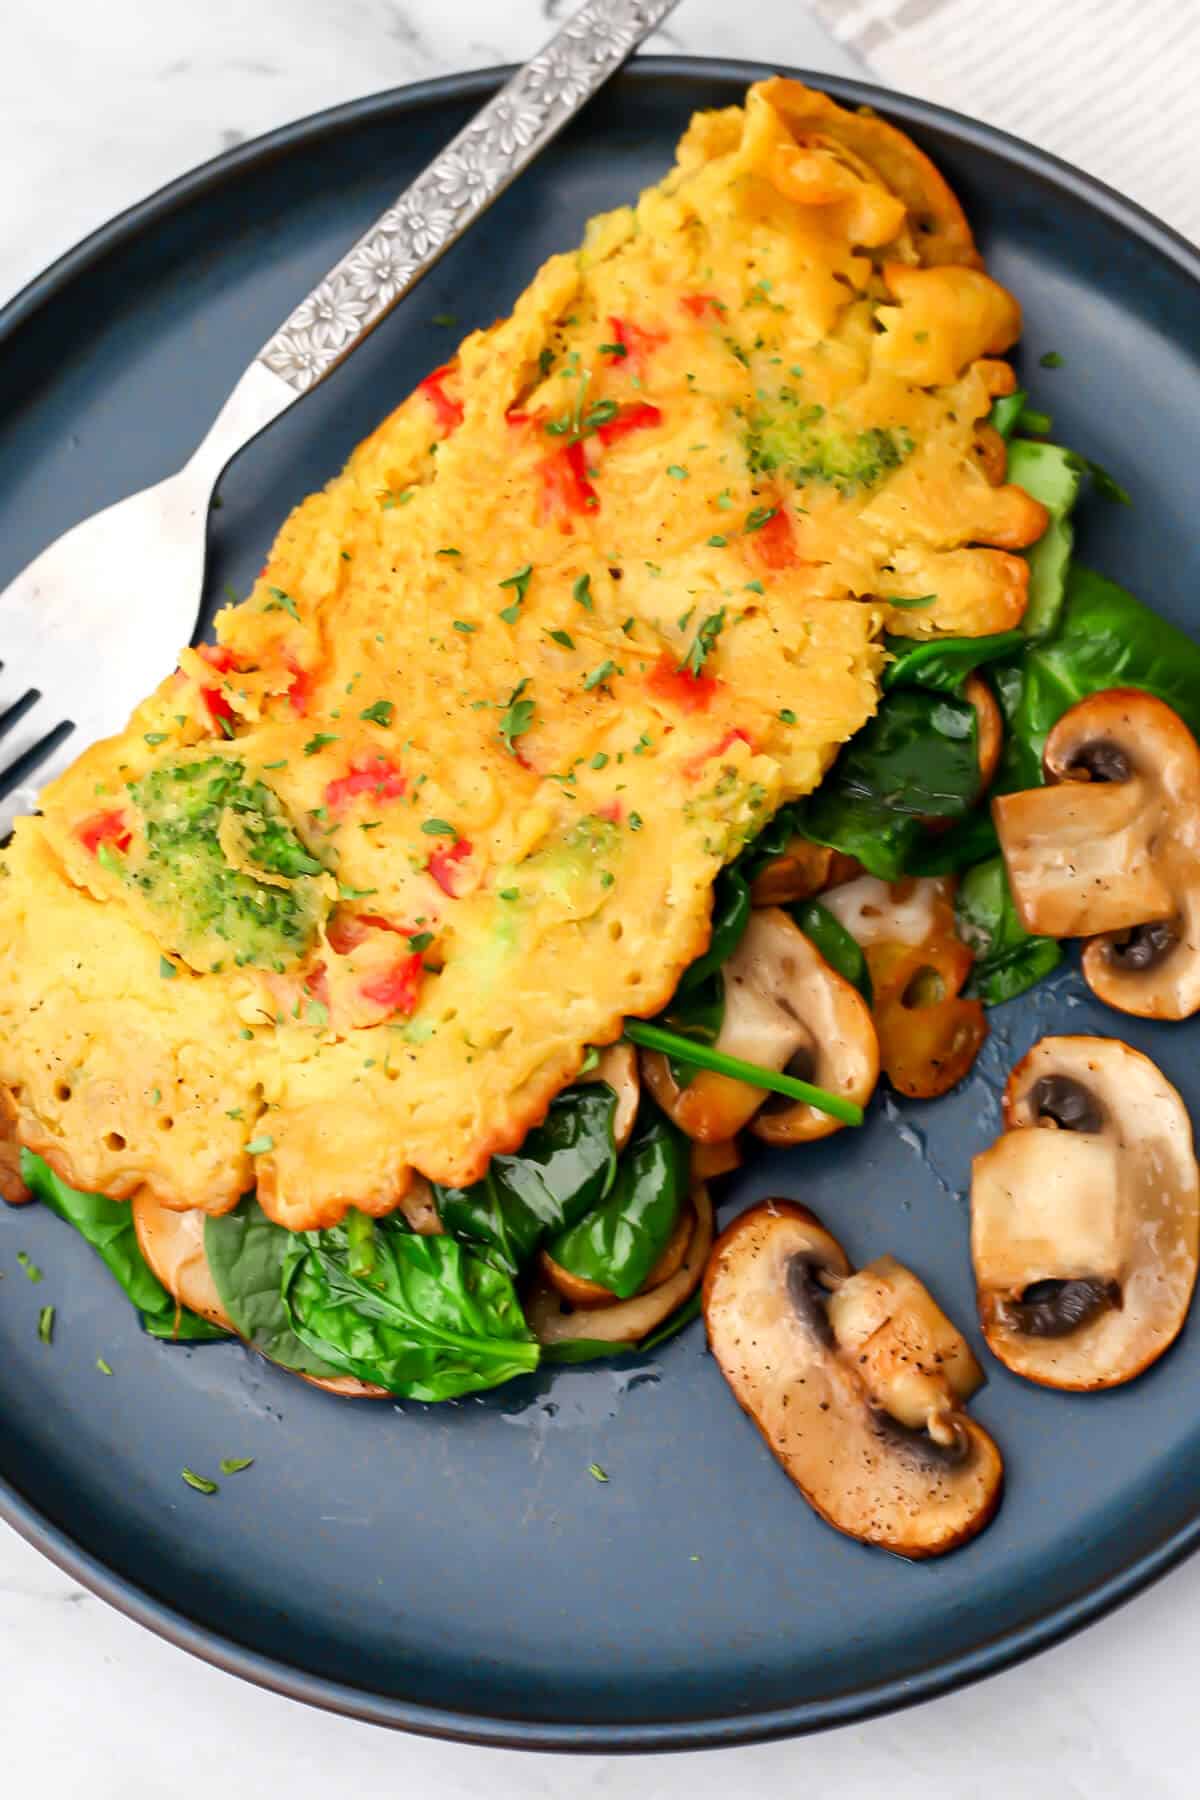 A top view of a vegan omelet made from chickpea flour and veggies on a blue plate.